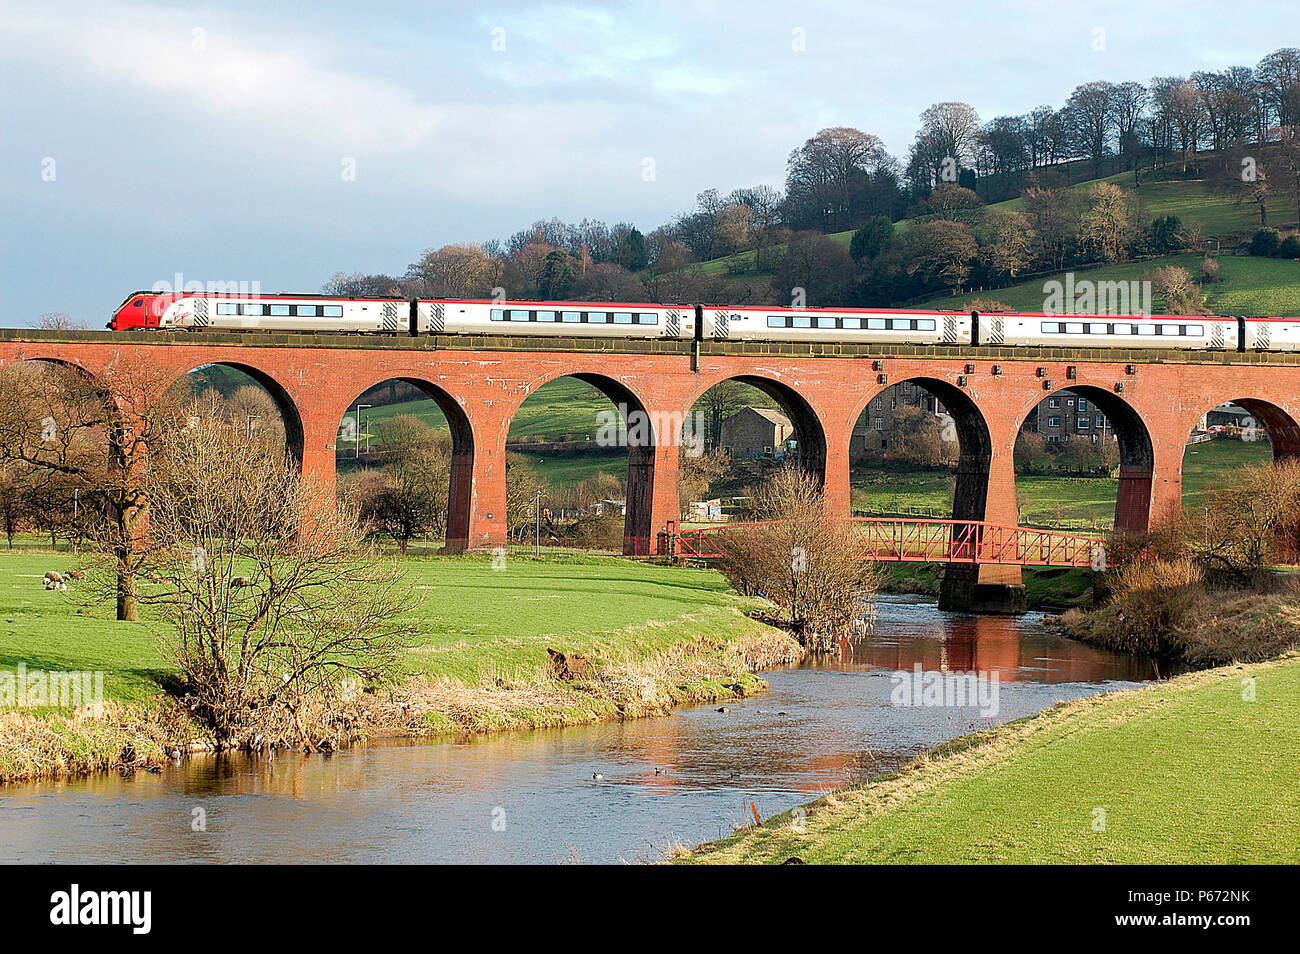 A Virgin Voyager crosses the viaduct at Whalley on the Settle and Carlisle Railway. 2004. Stock Photo